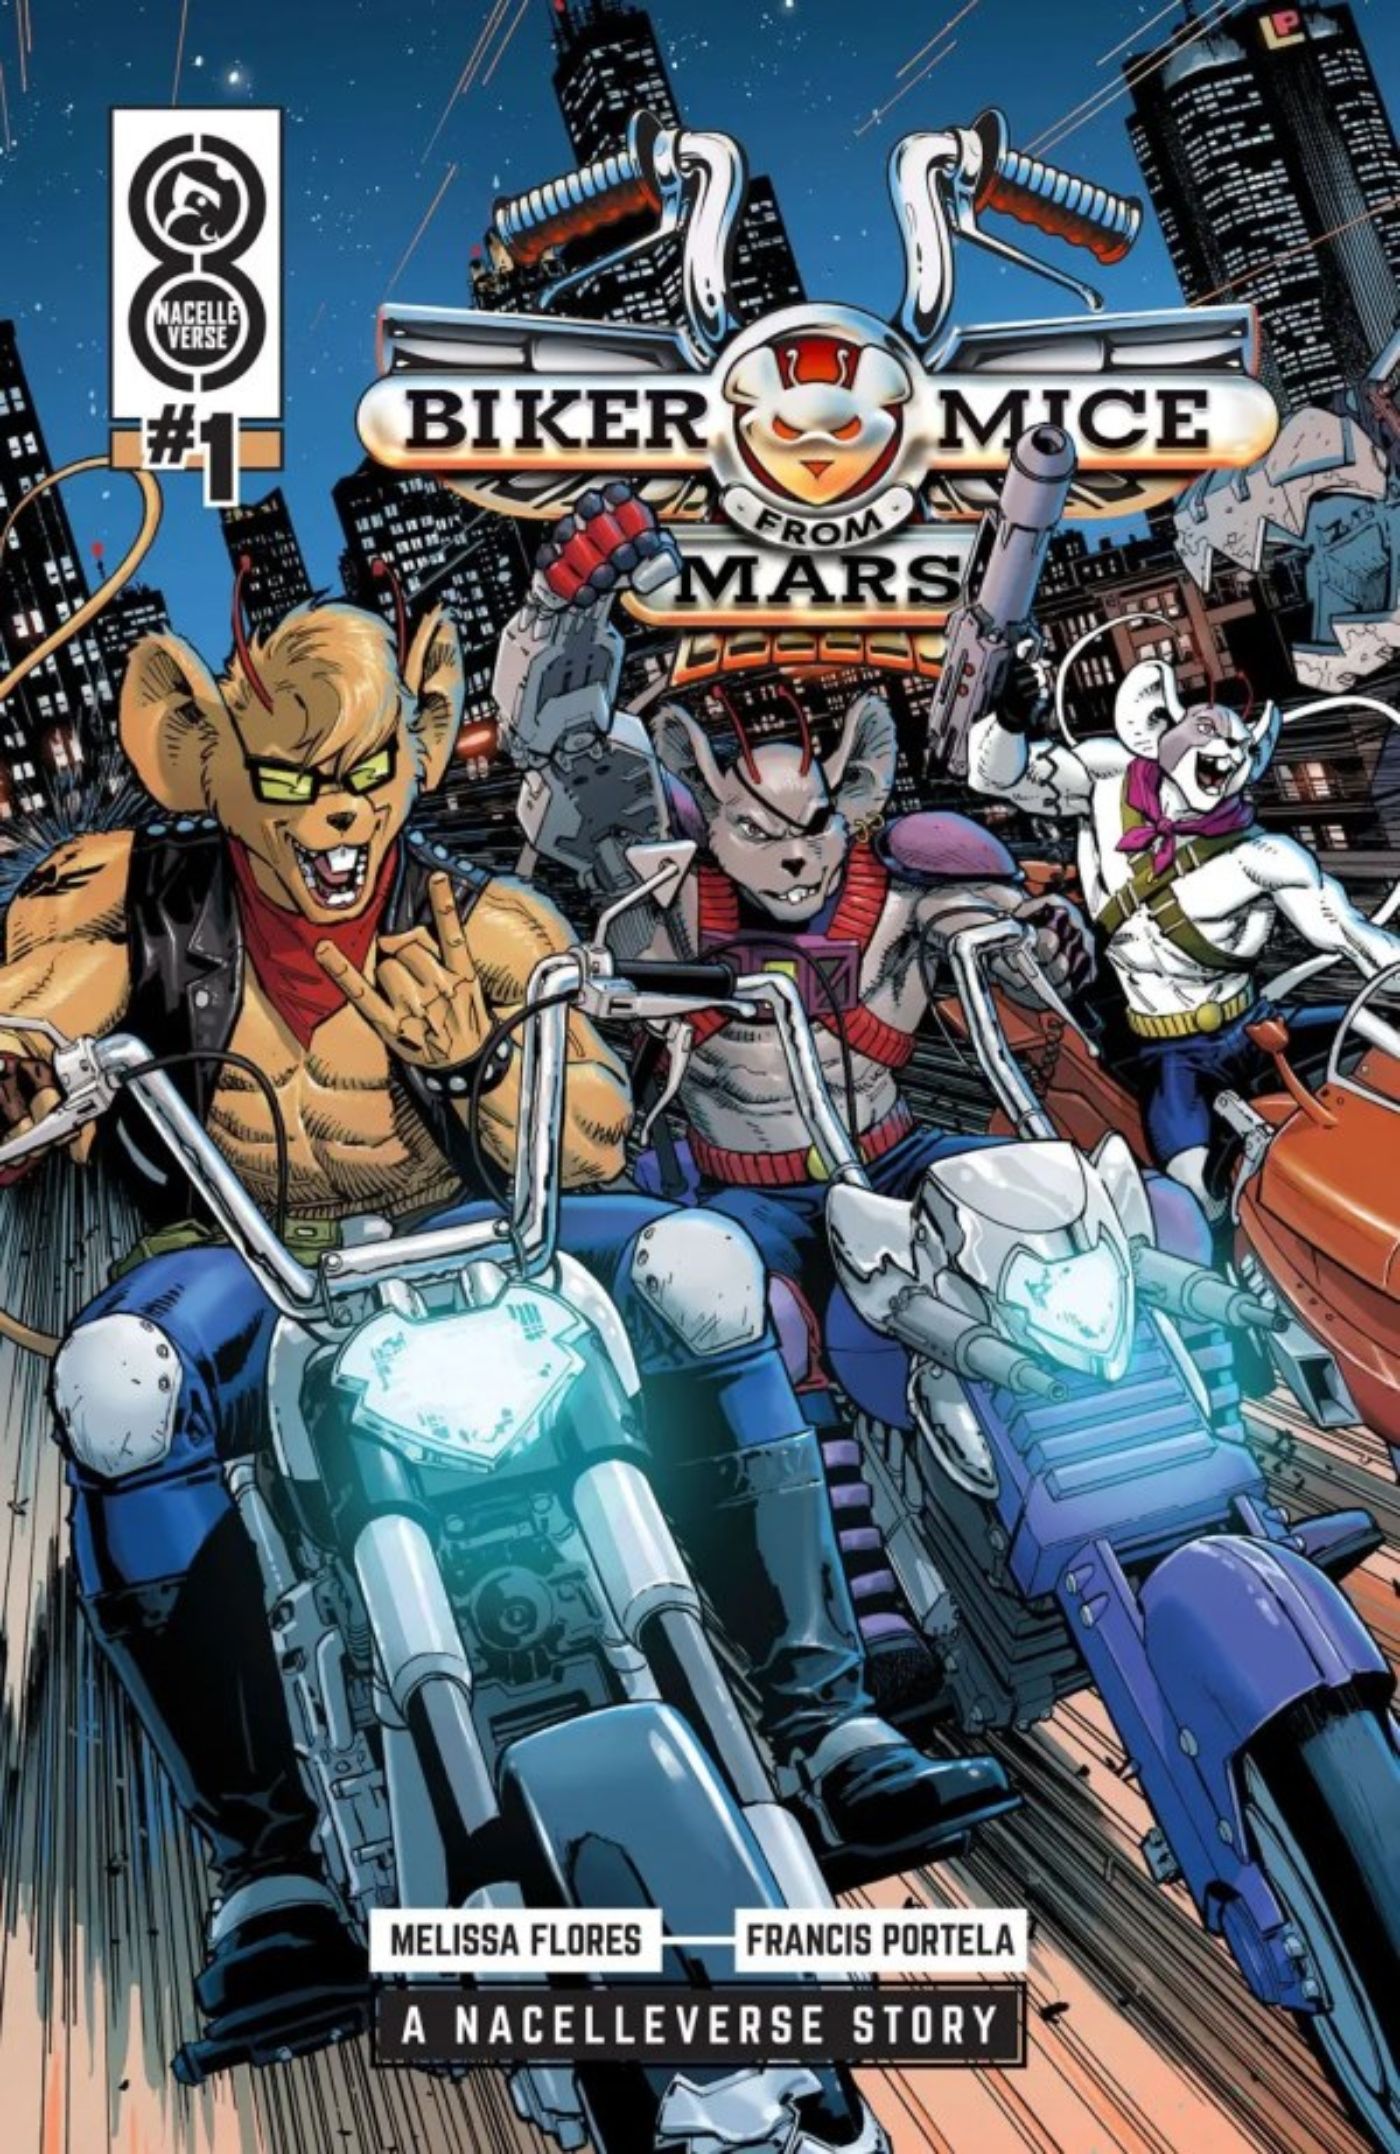 Biker Mice from Mars #1 cover featuring the titular heroes.